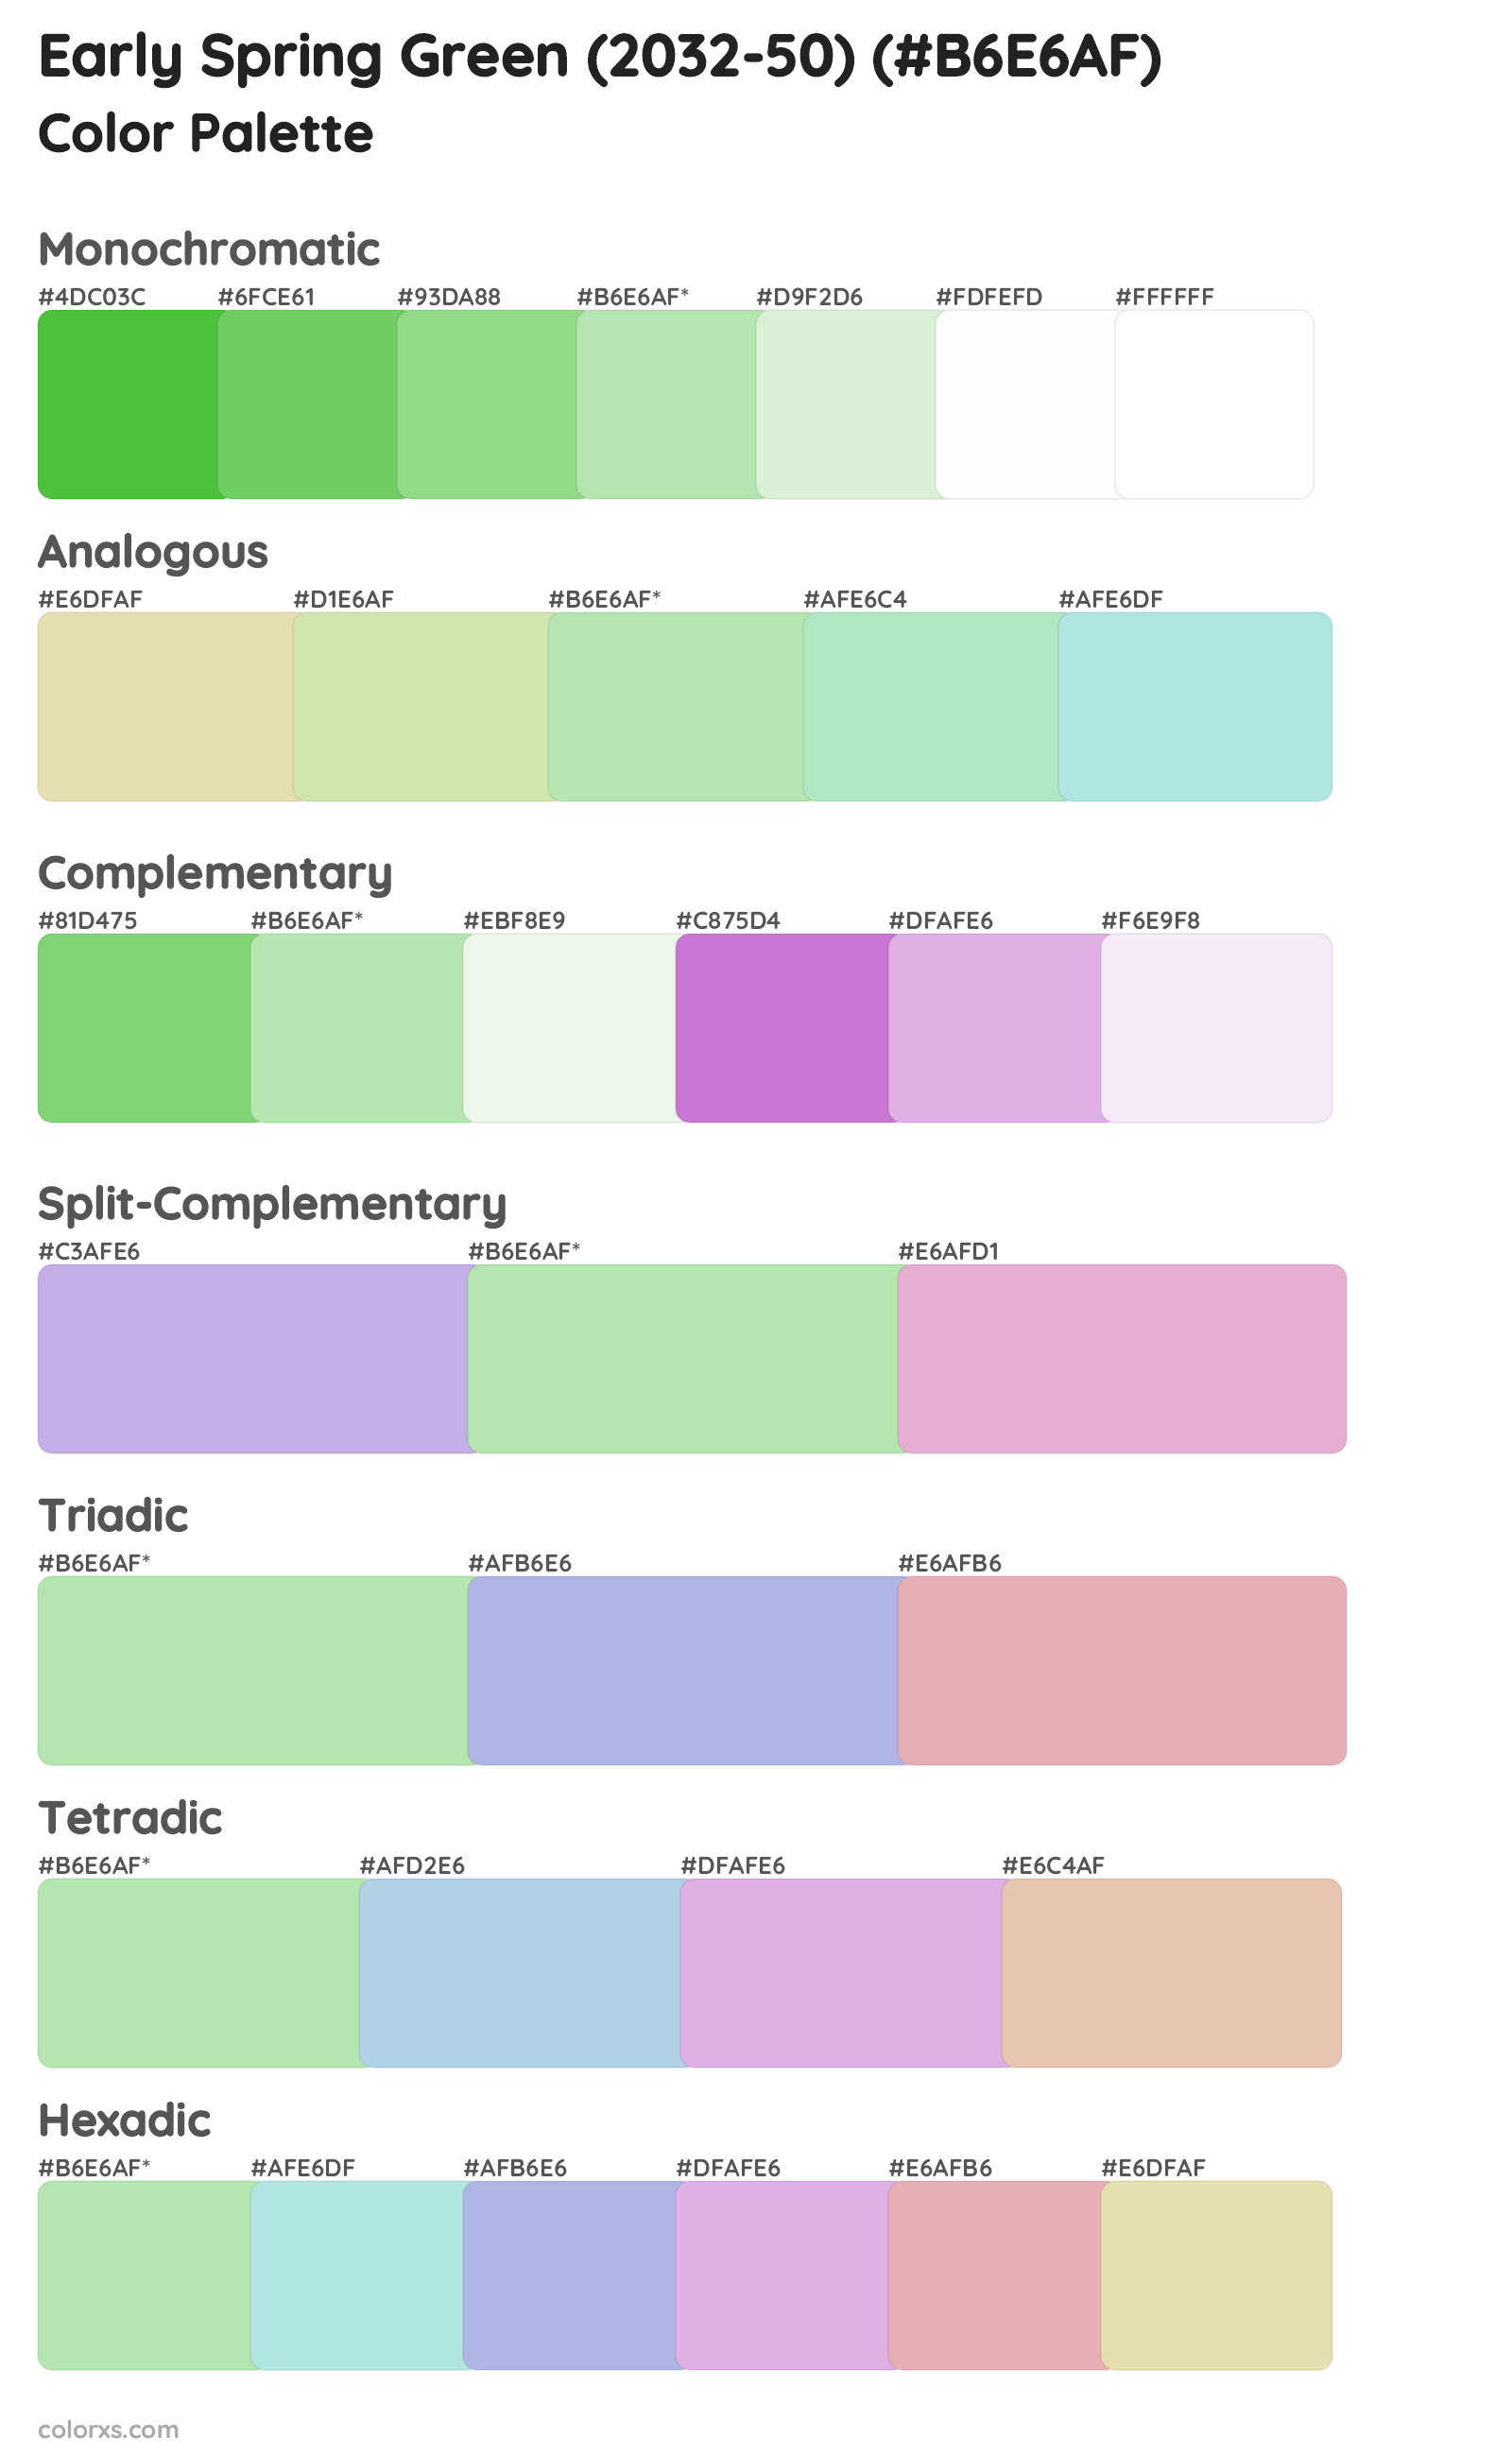 Early Spring Green (2032-50) Color Scheme Palettes